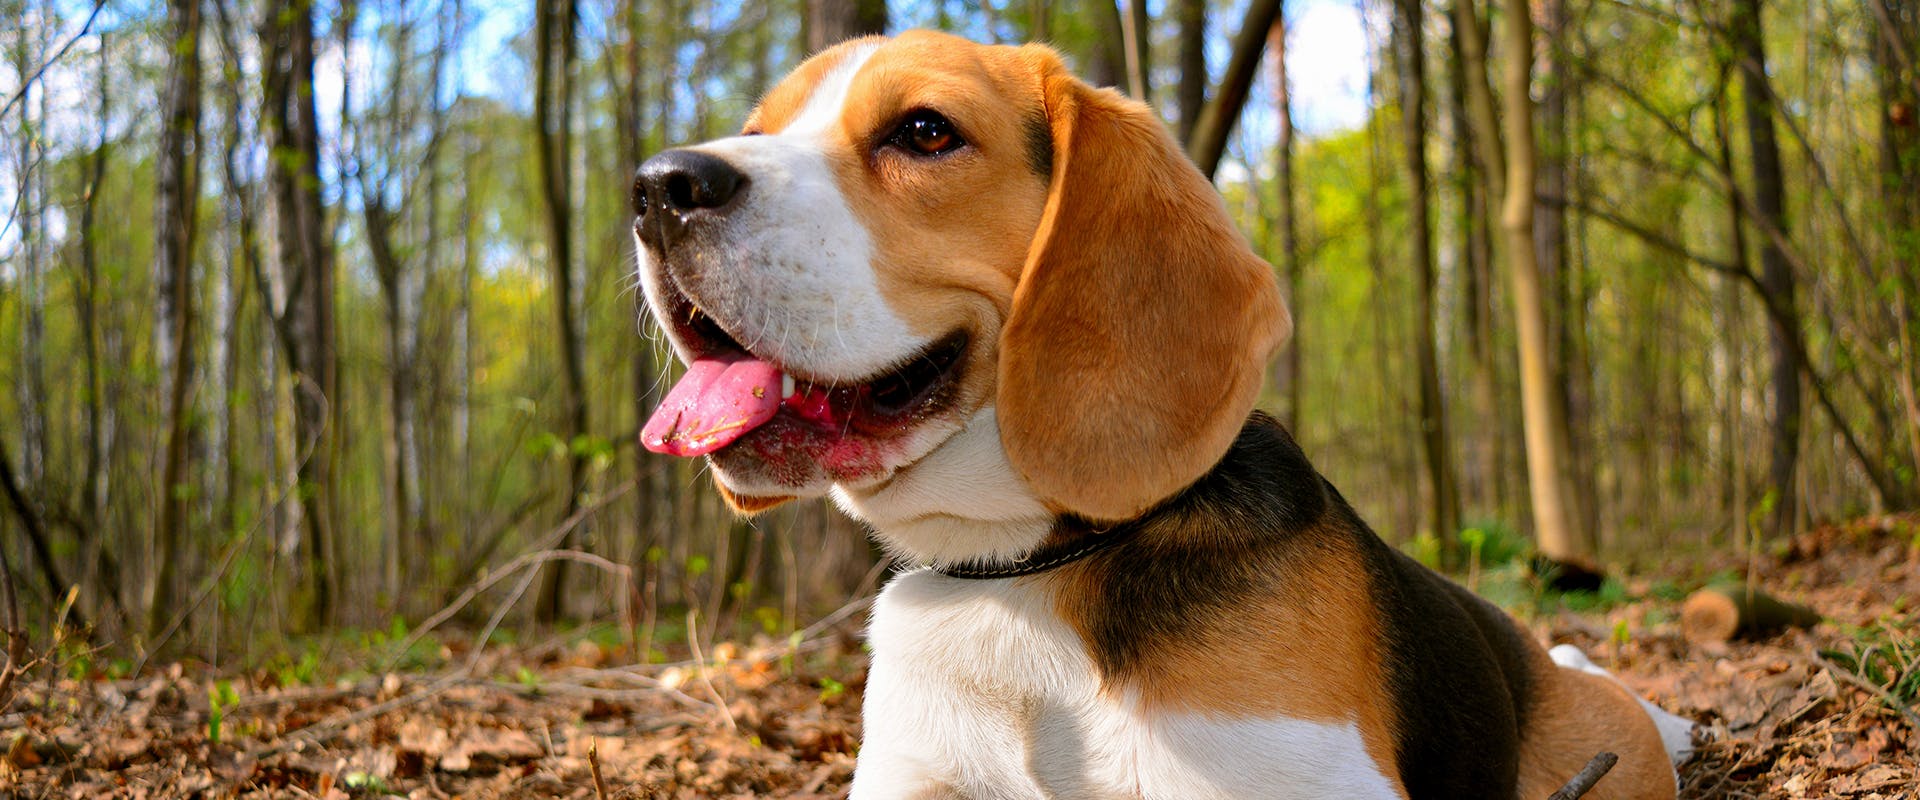 A Beagle sitting in the middle of a forest